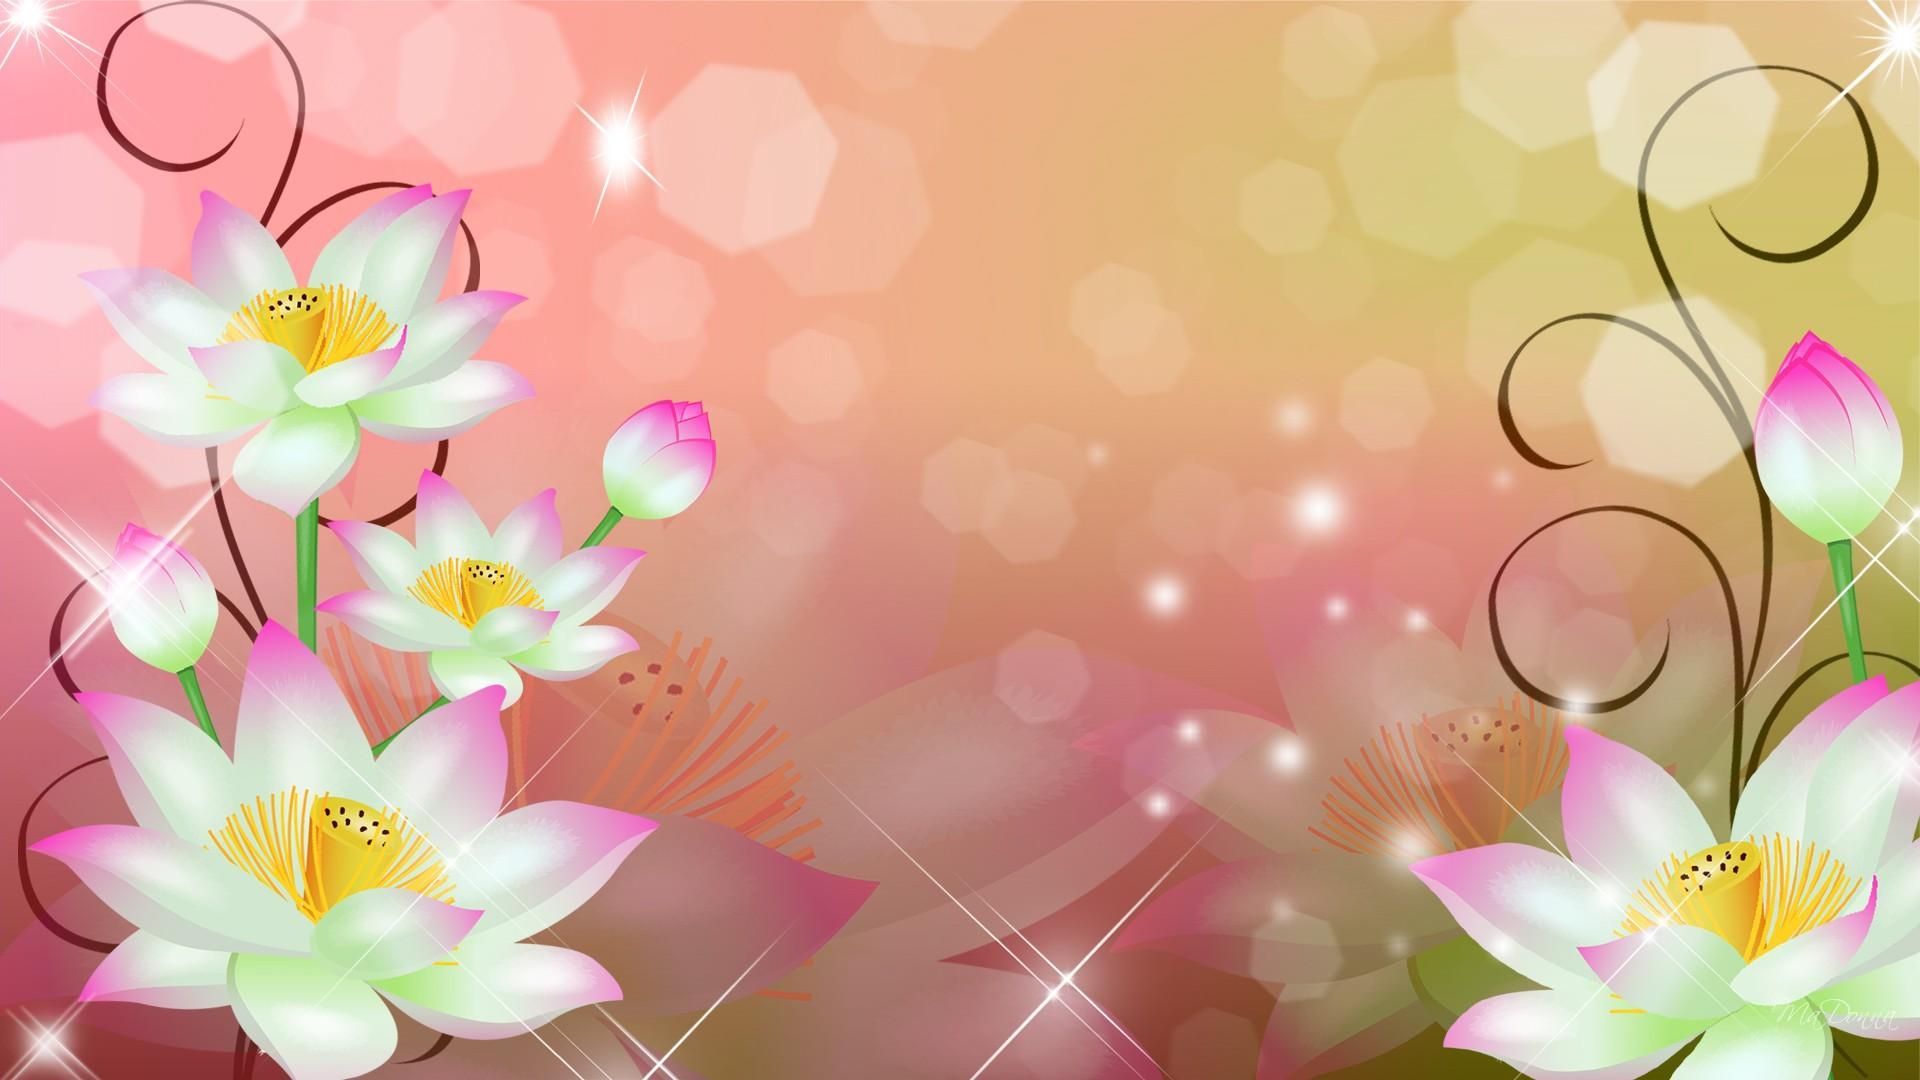 Lotus Flowers Full HD Wallpaper and Background Imagex1080